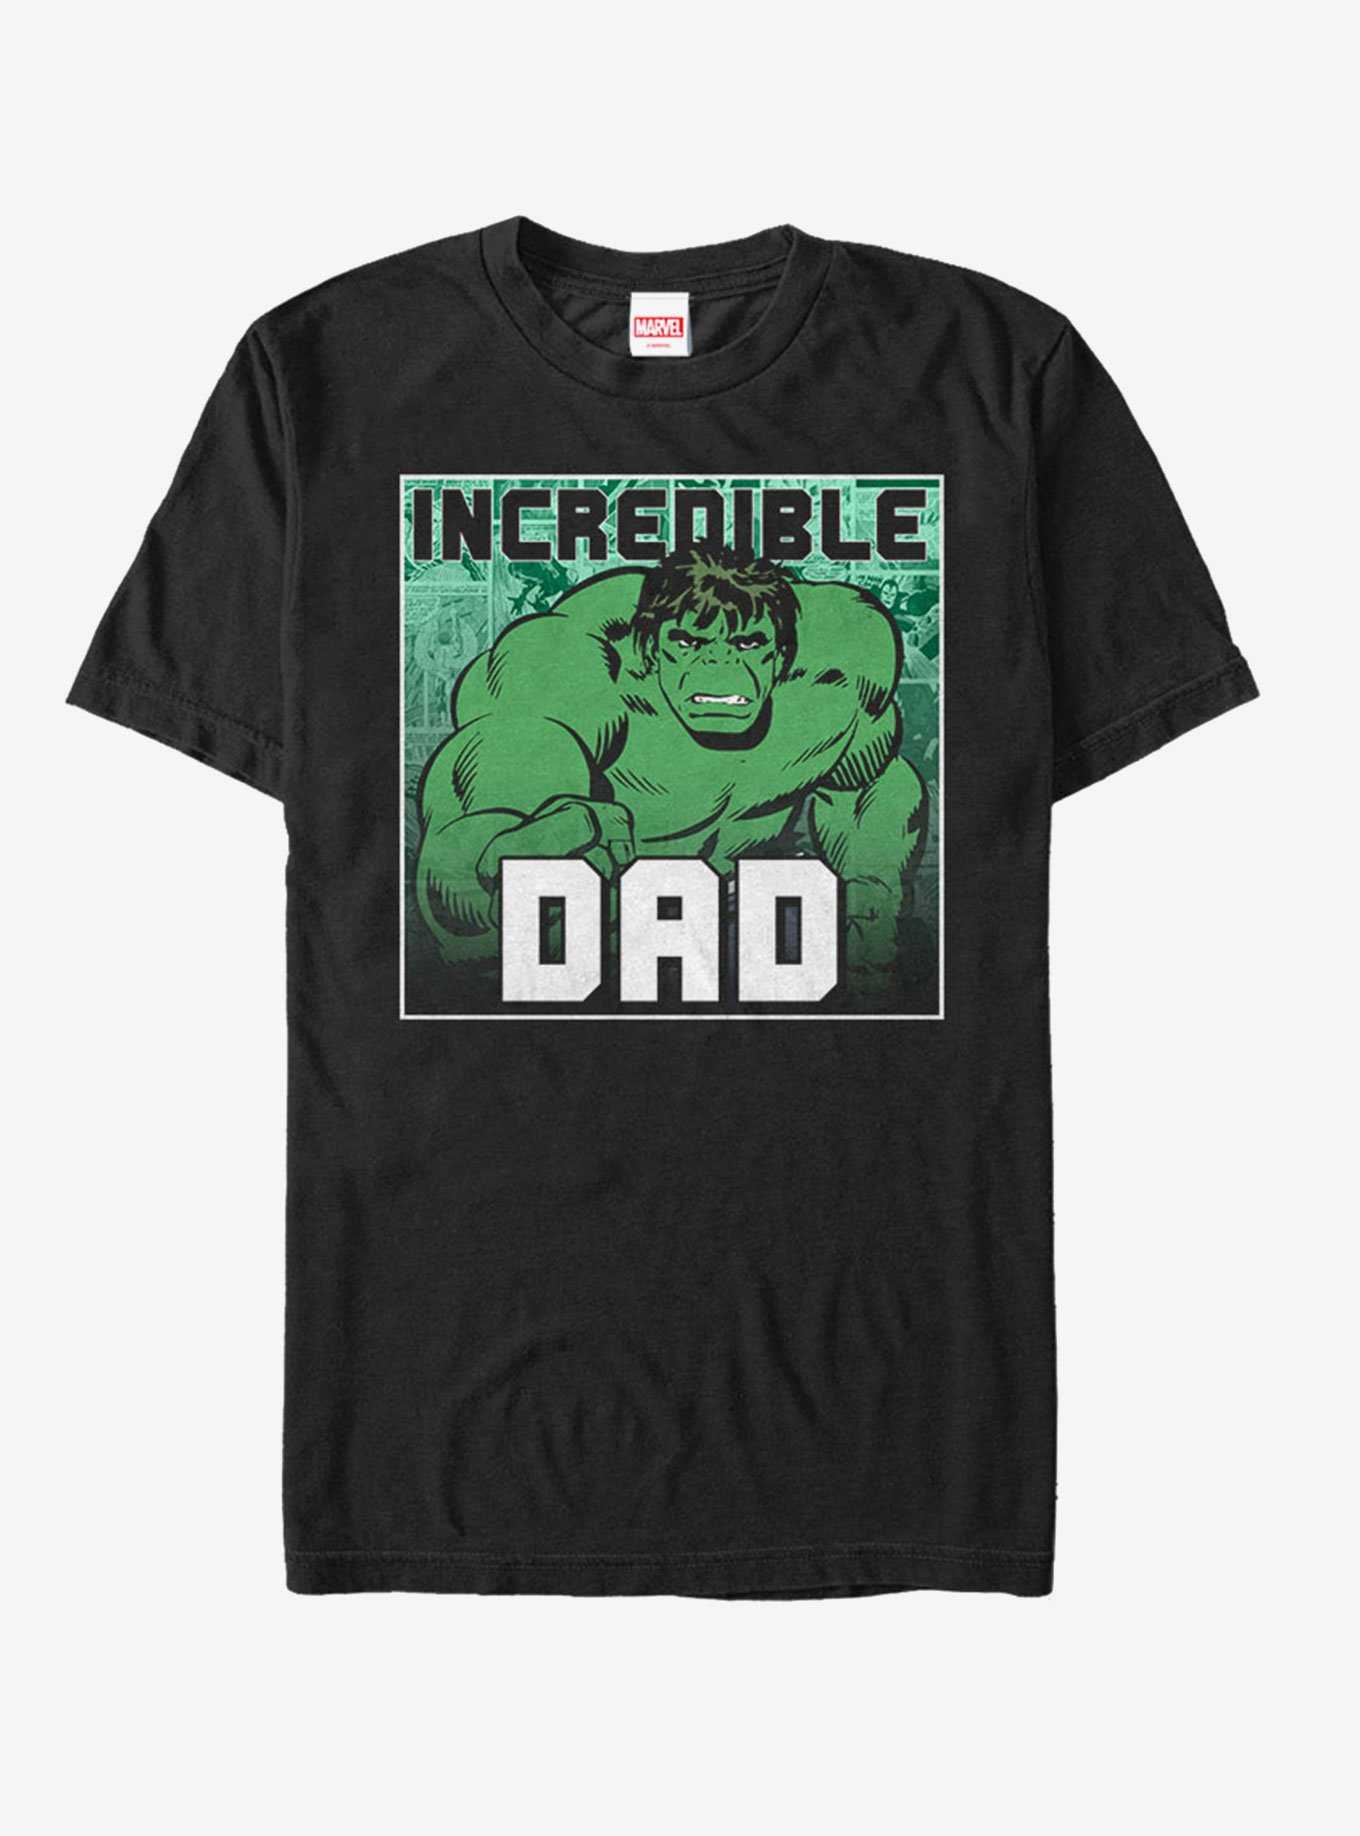 Marvel Father's Day Hulk Incredible Dad T-Shirt, , hi-res